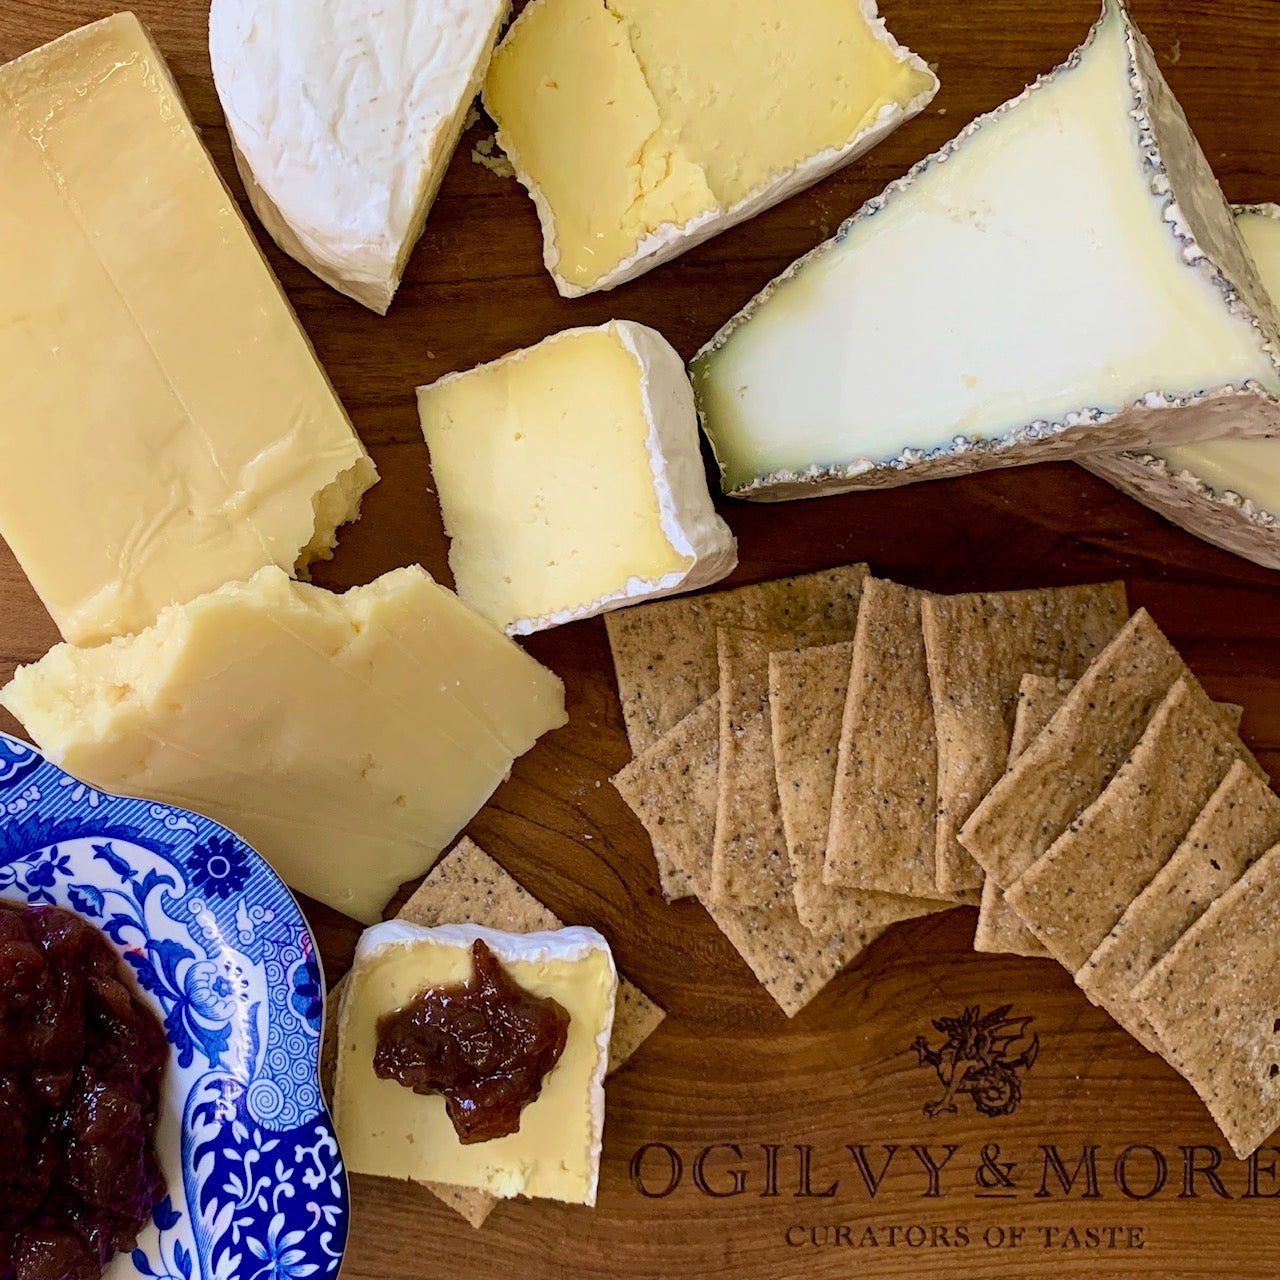 The Parrott Cheese Selection